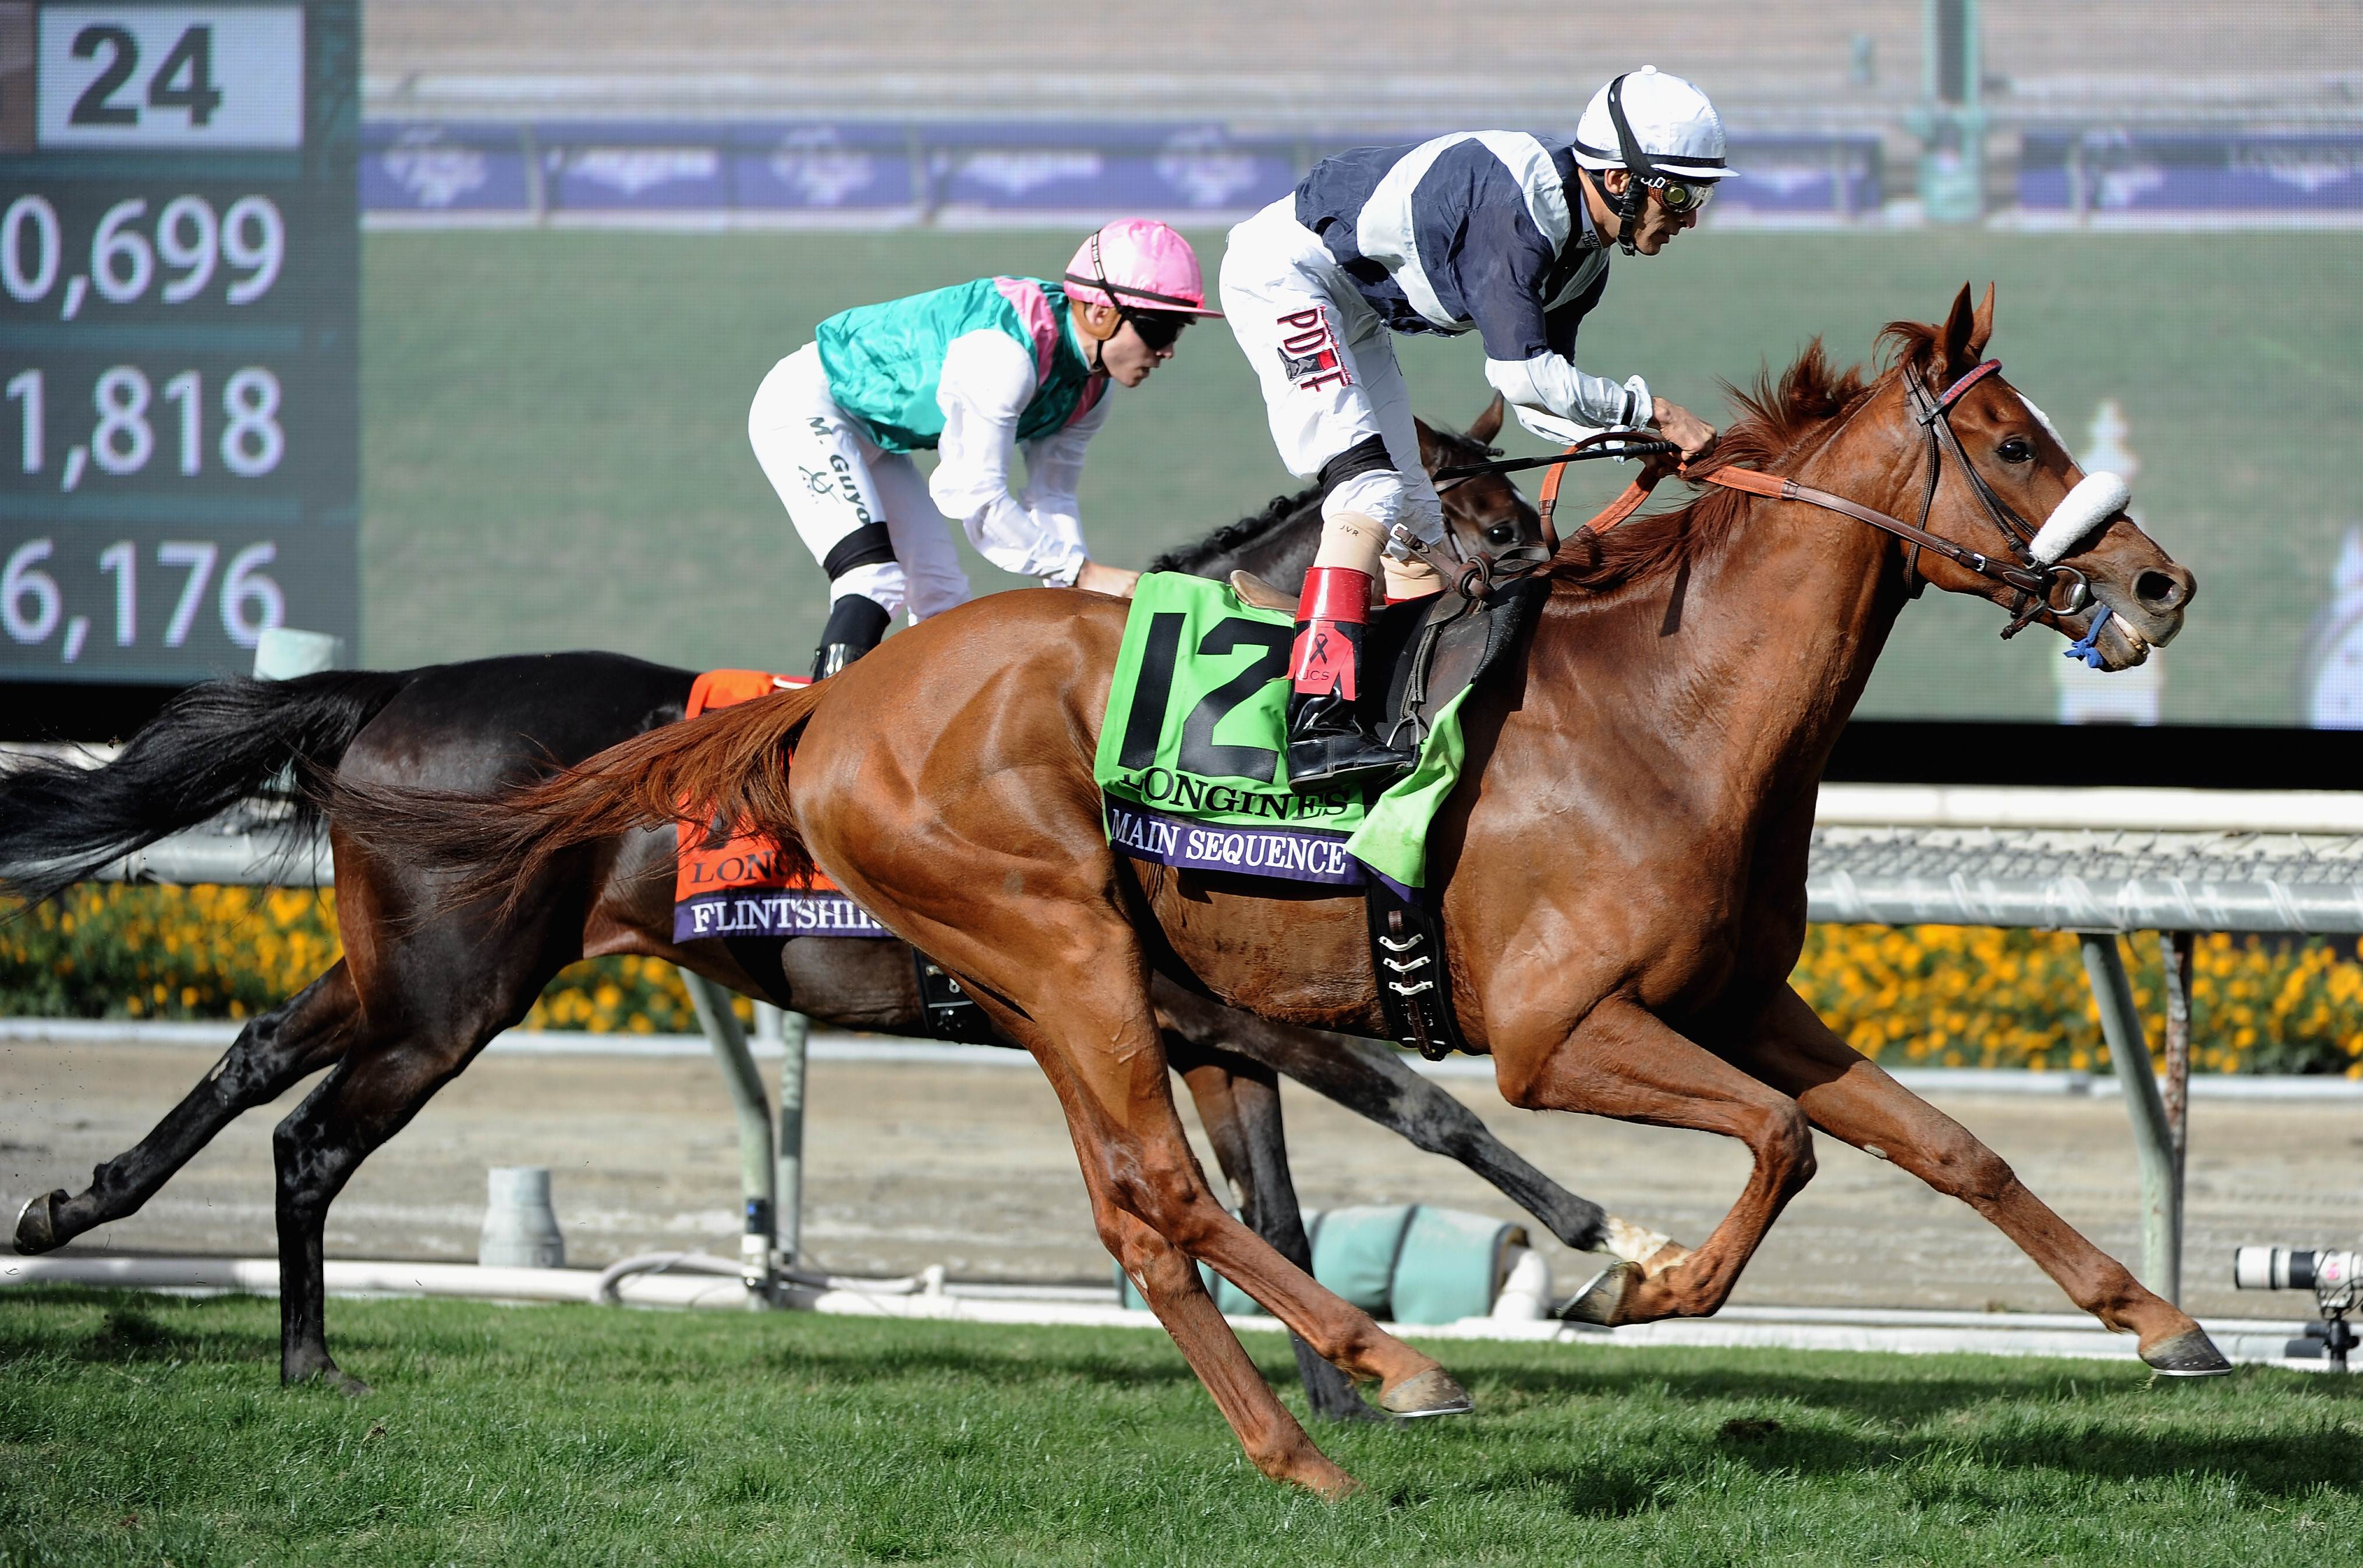 Main Sequence (John Velazquez) just holds Flintshire (Maxime Guyon) in the Breeders' Cup Turf. Photo: AFP/Getty Images